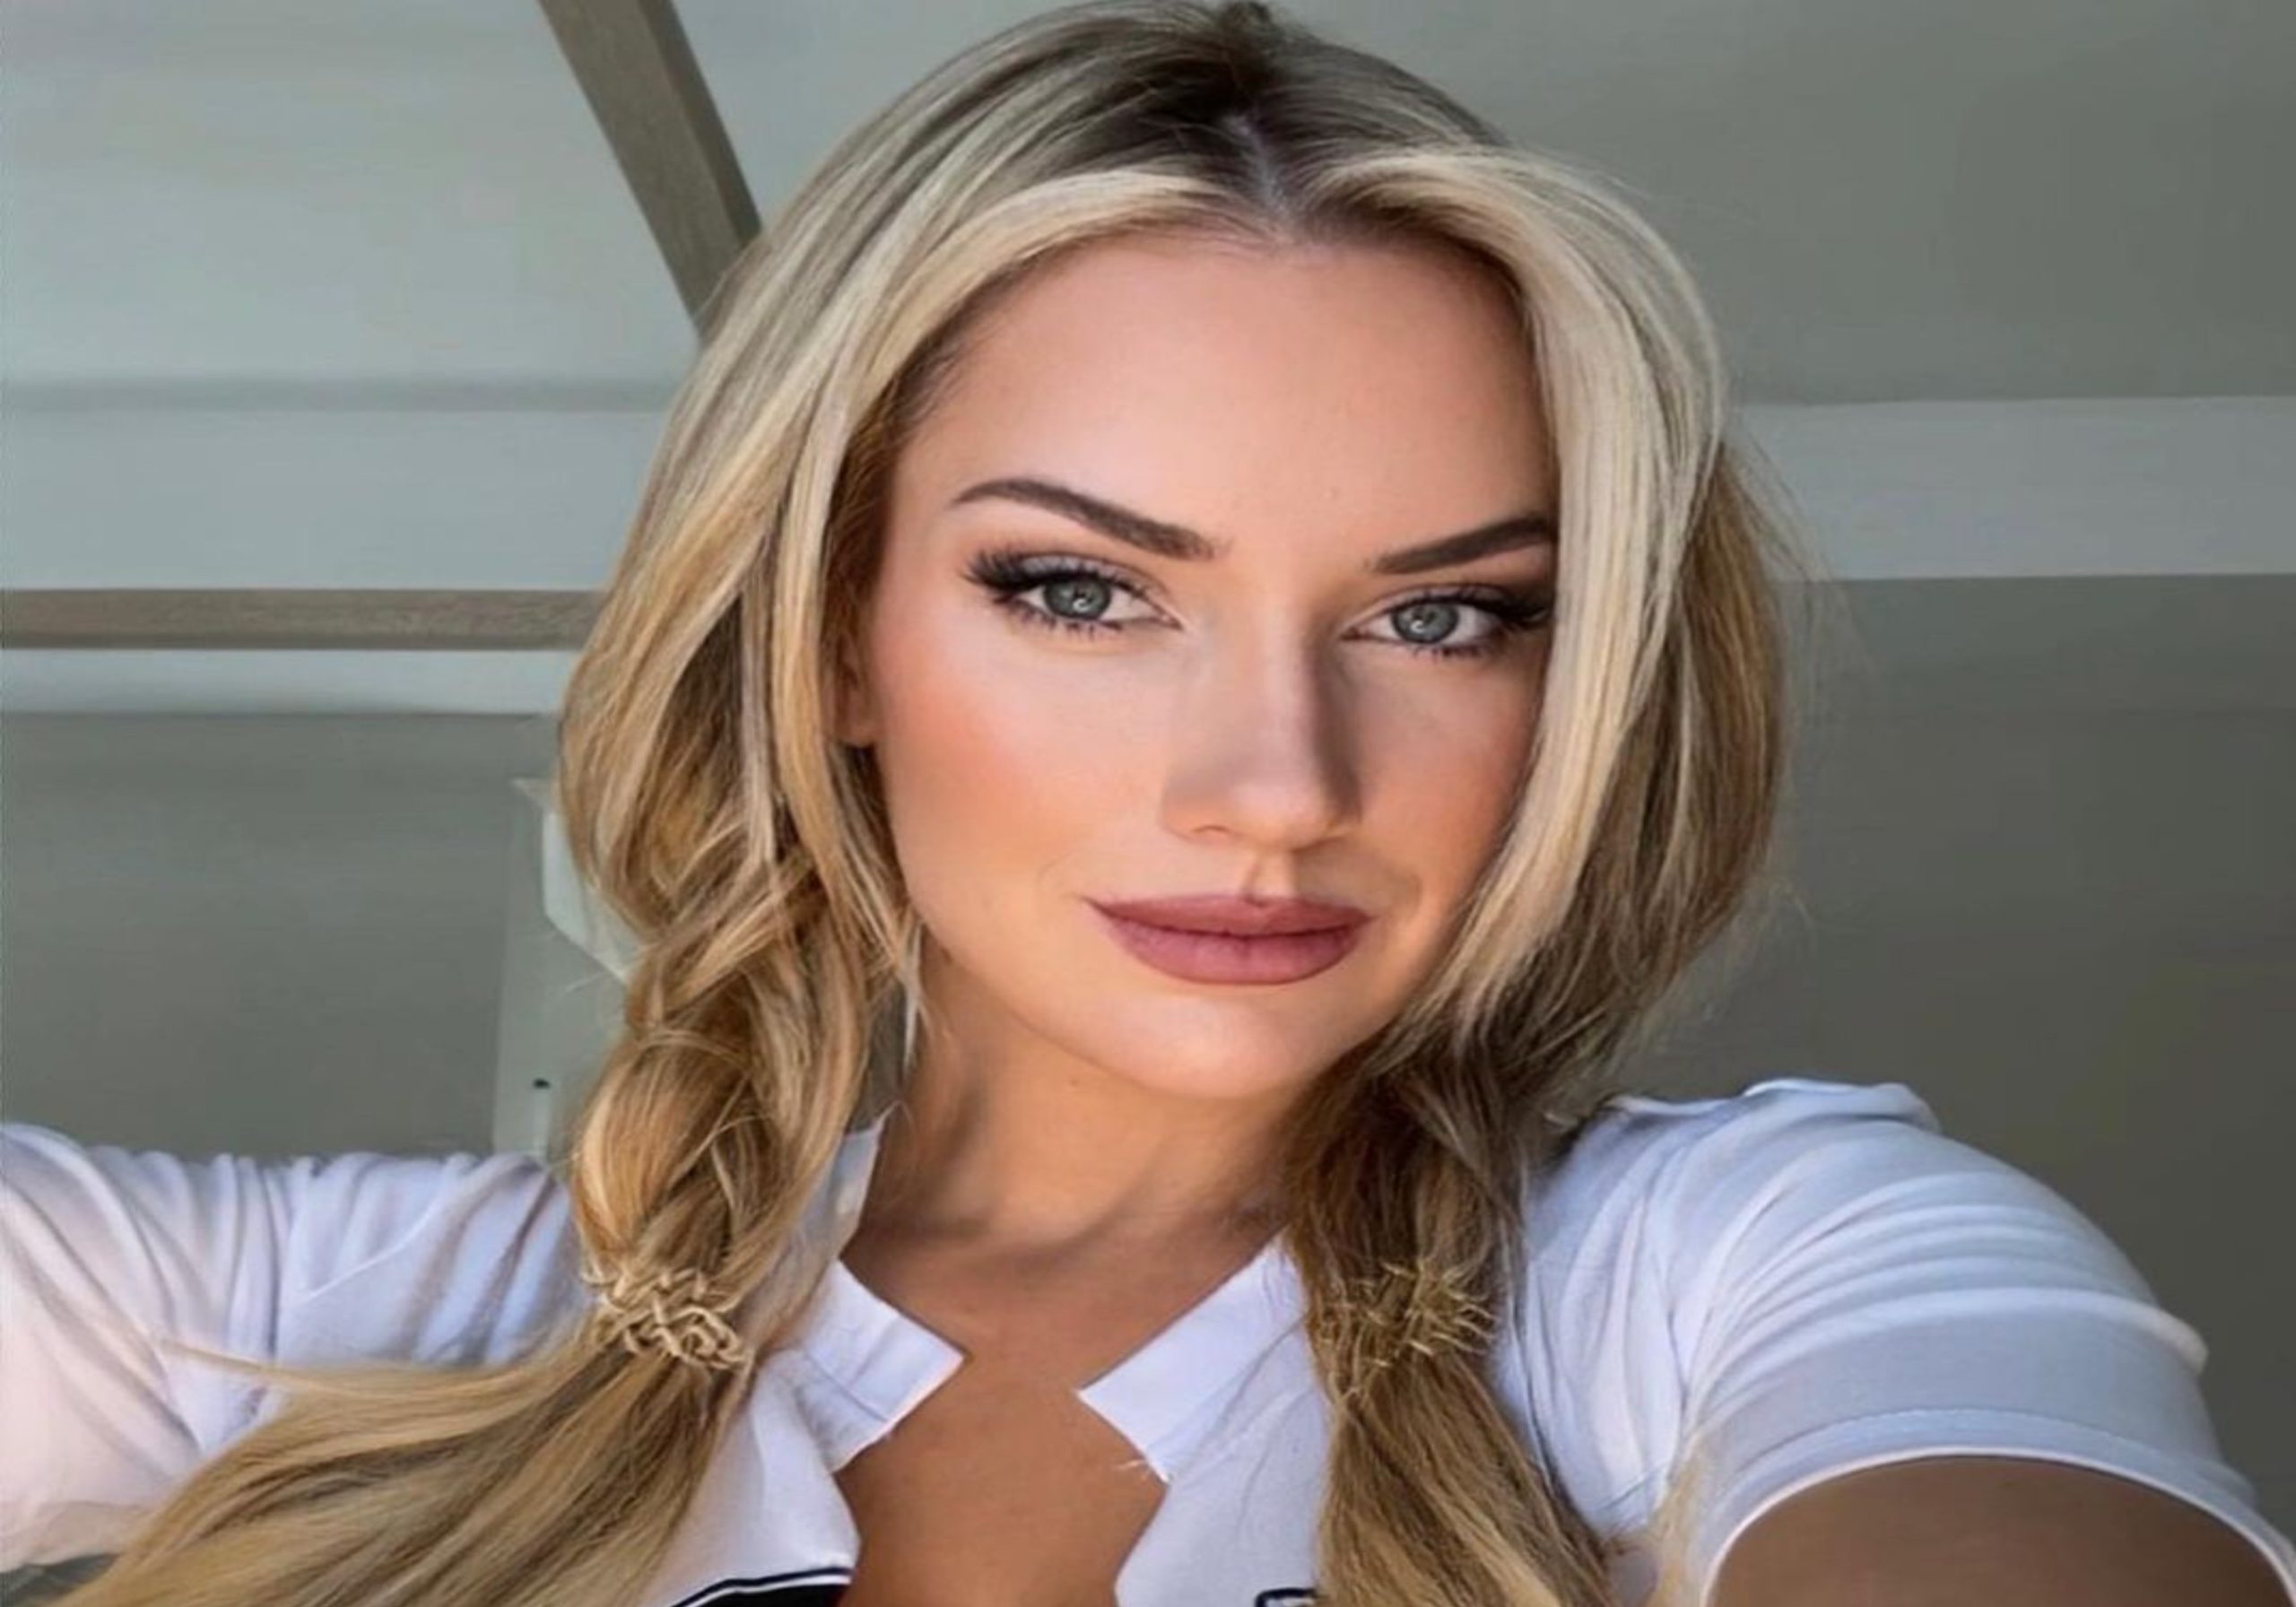 Celebrity Paige Spiranac Wishes Fans, Shares 2023 Sports Season Predictions, Promotes National Championship in White Bikini Top